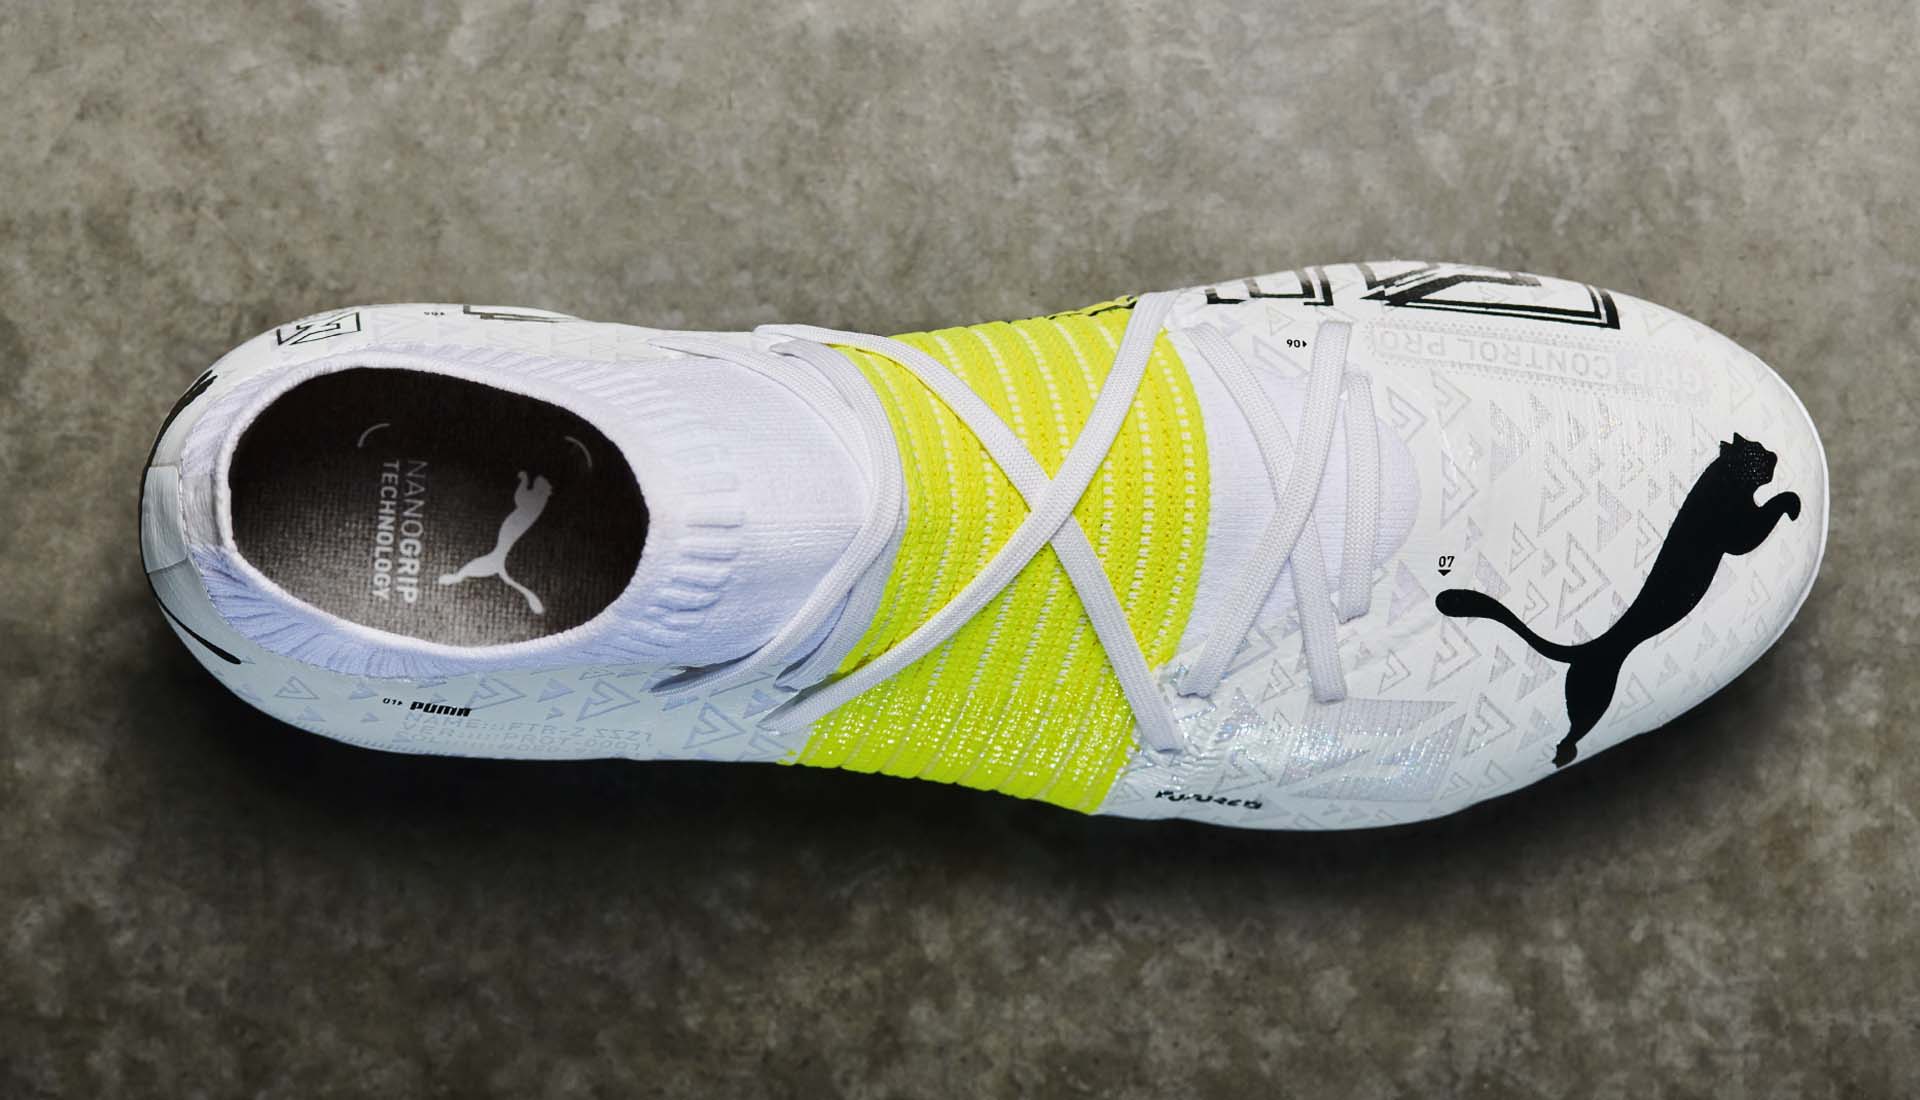 Puma Launch The Future Z 1 1 Teaser Edition Soccerbible